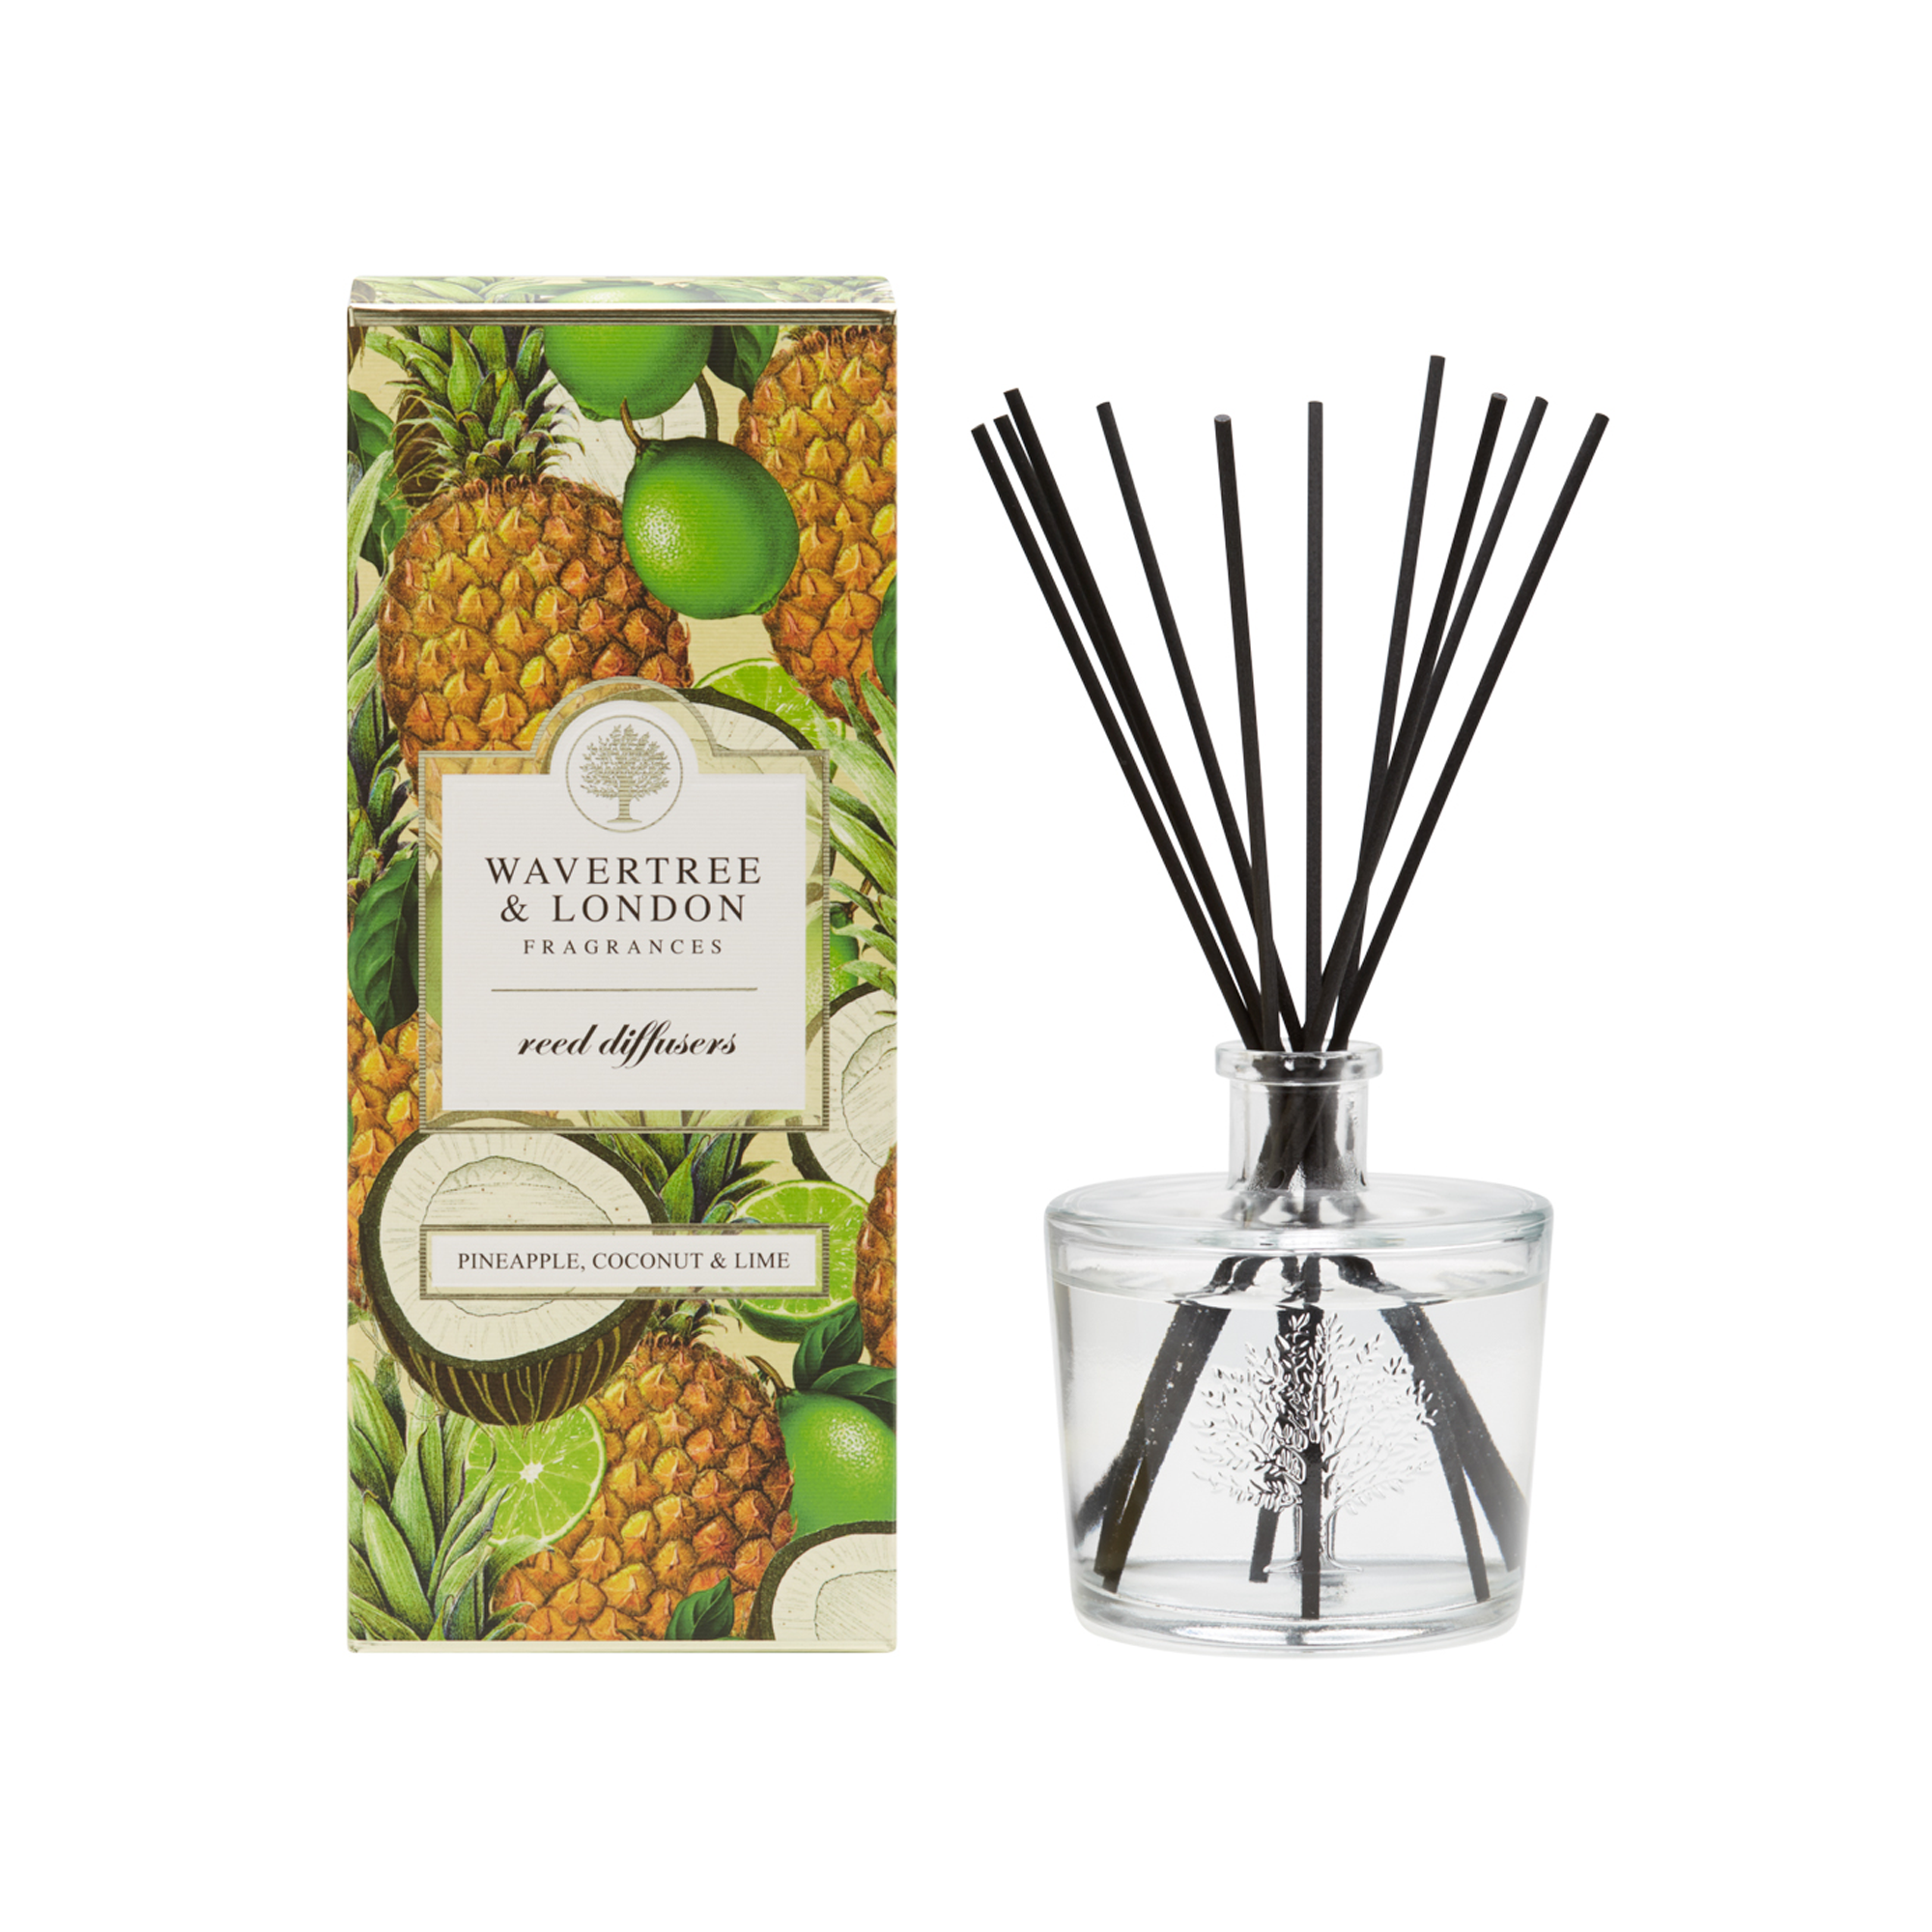 Pineapple, Coconut & Lime Diffuser